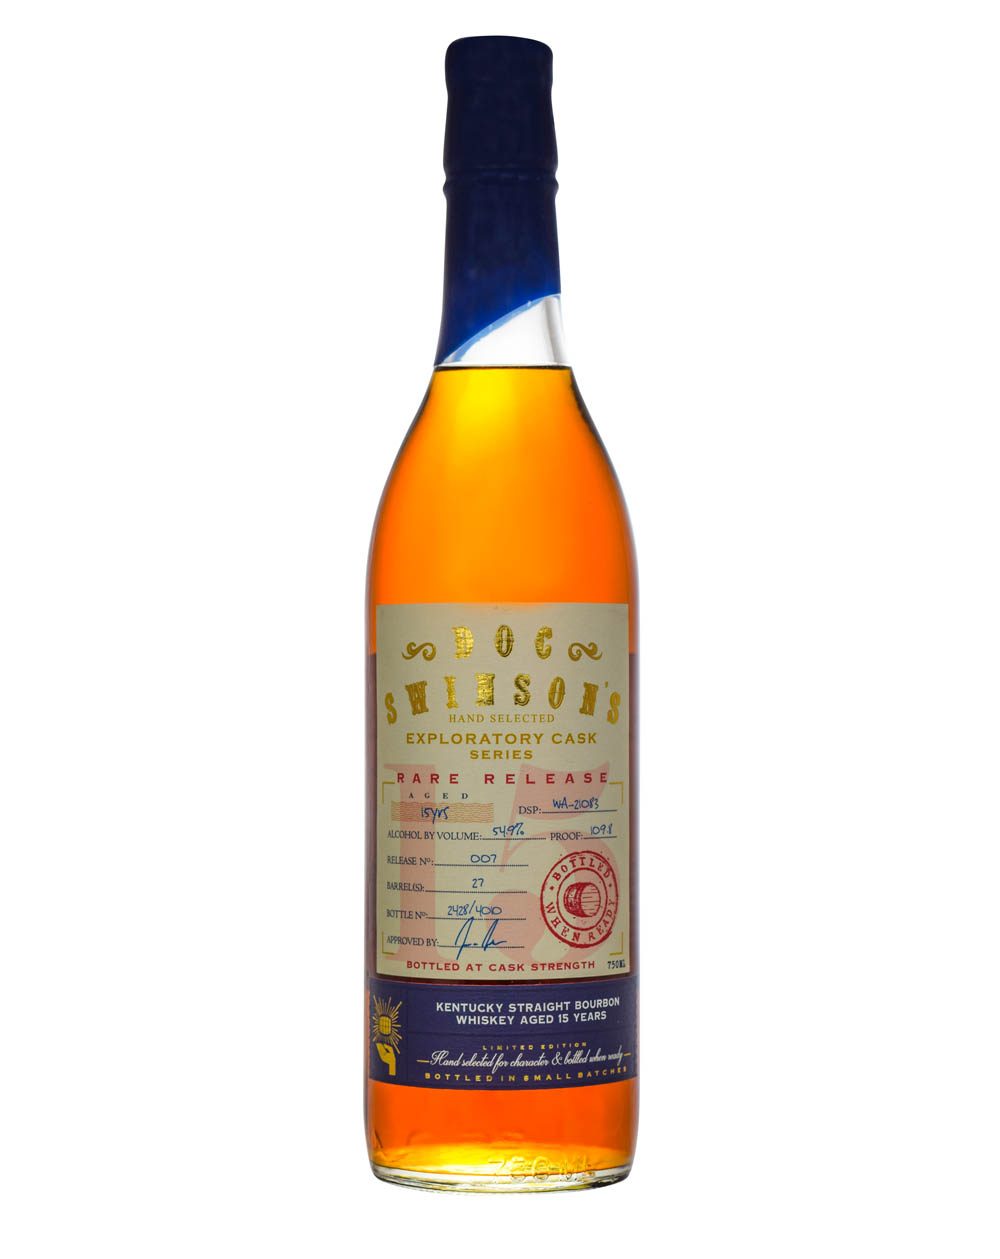 Doc Swinson's Exploratory Cask Series Release 007 15 Years Old Musthave Malts MHM